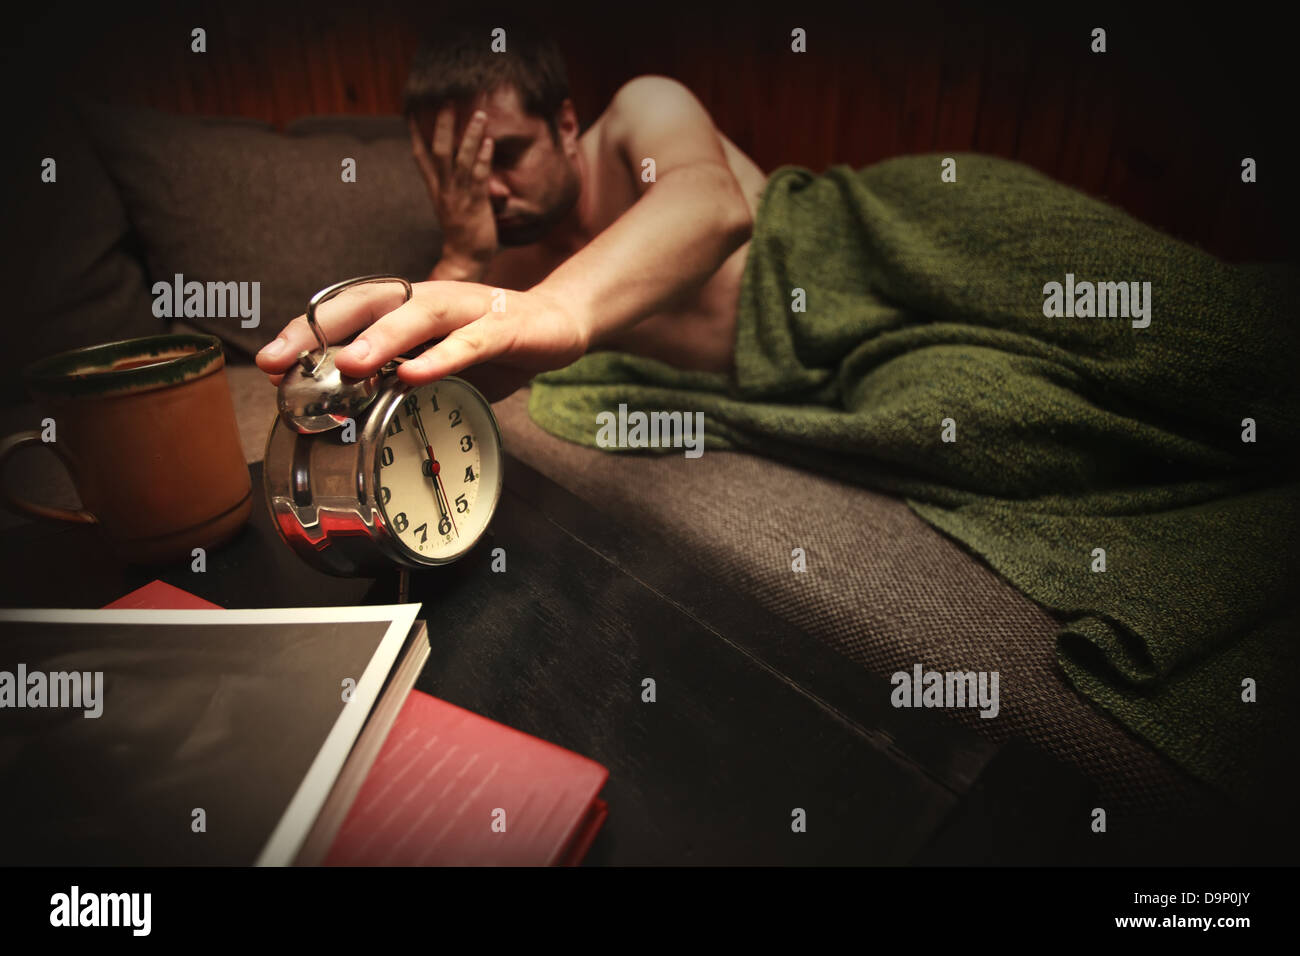 wake-up conceptual image with man and clock Stock Photo